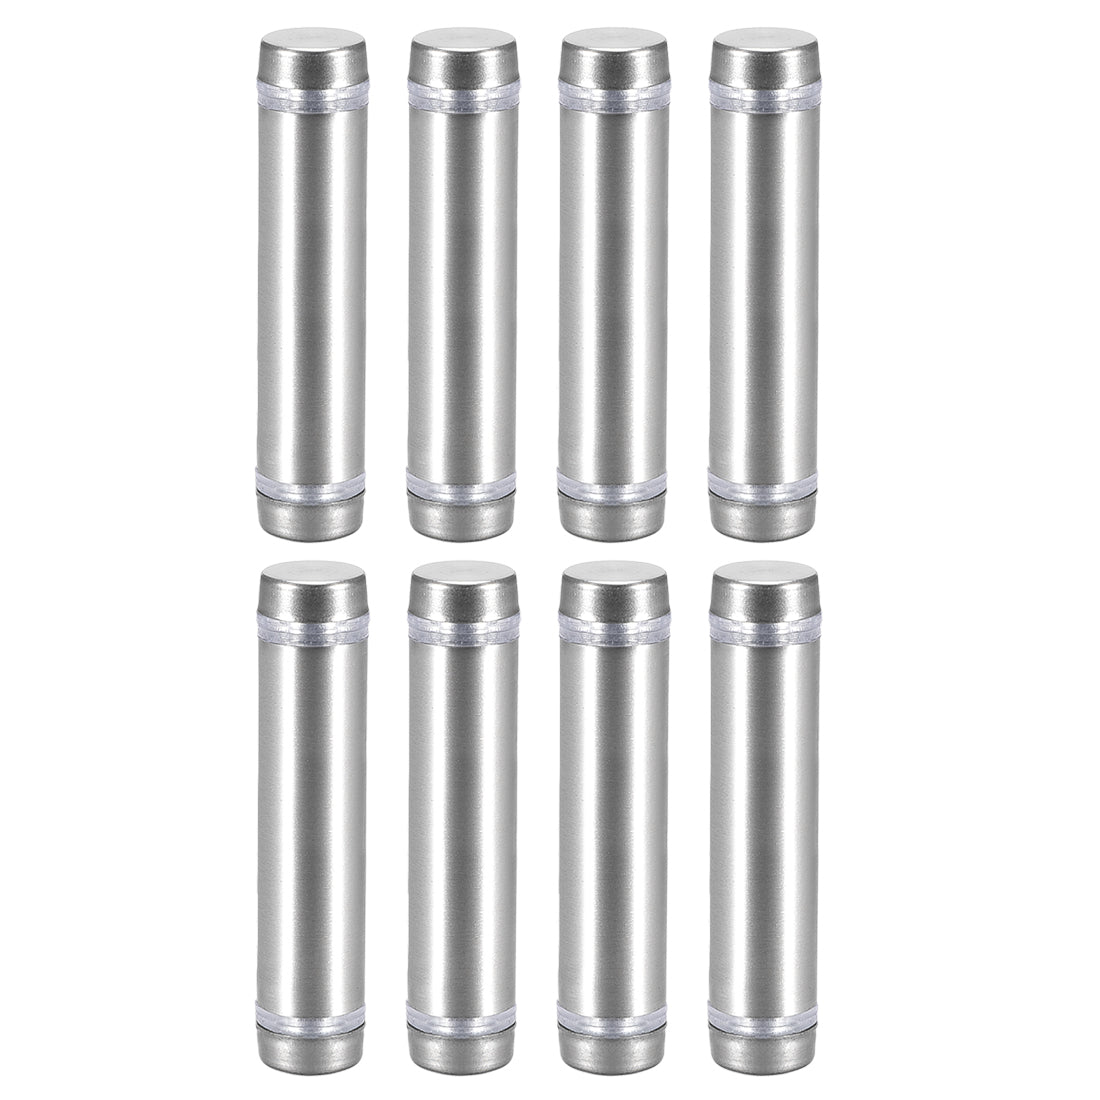 uxcell Uxcell Glass Standoff Double Head Stainless Steel Standoff Holder 12mm x 54mm 8 Pcs